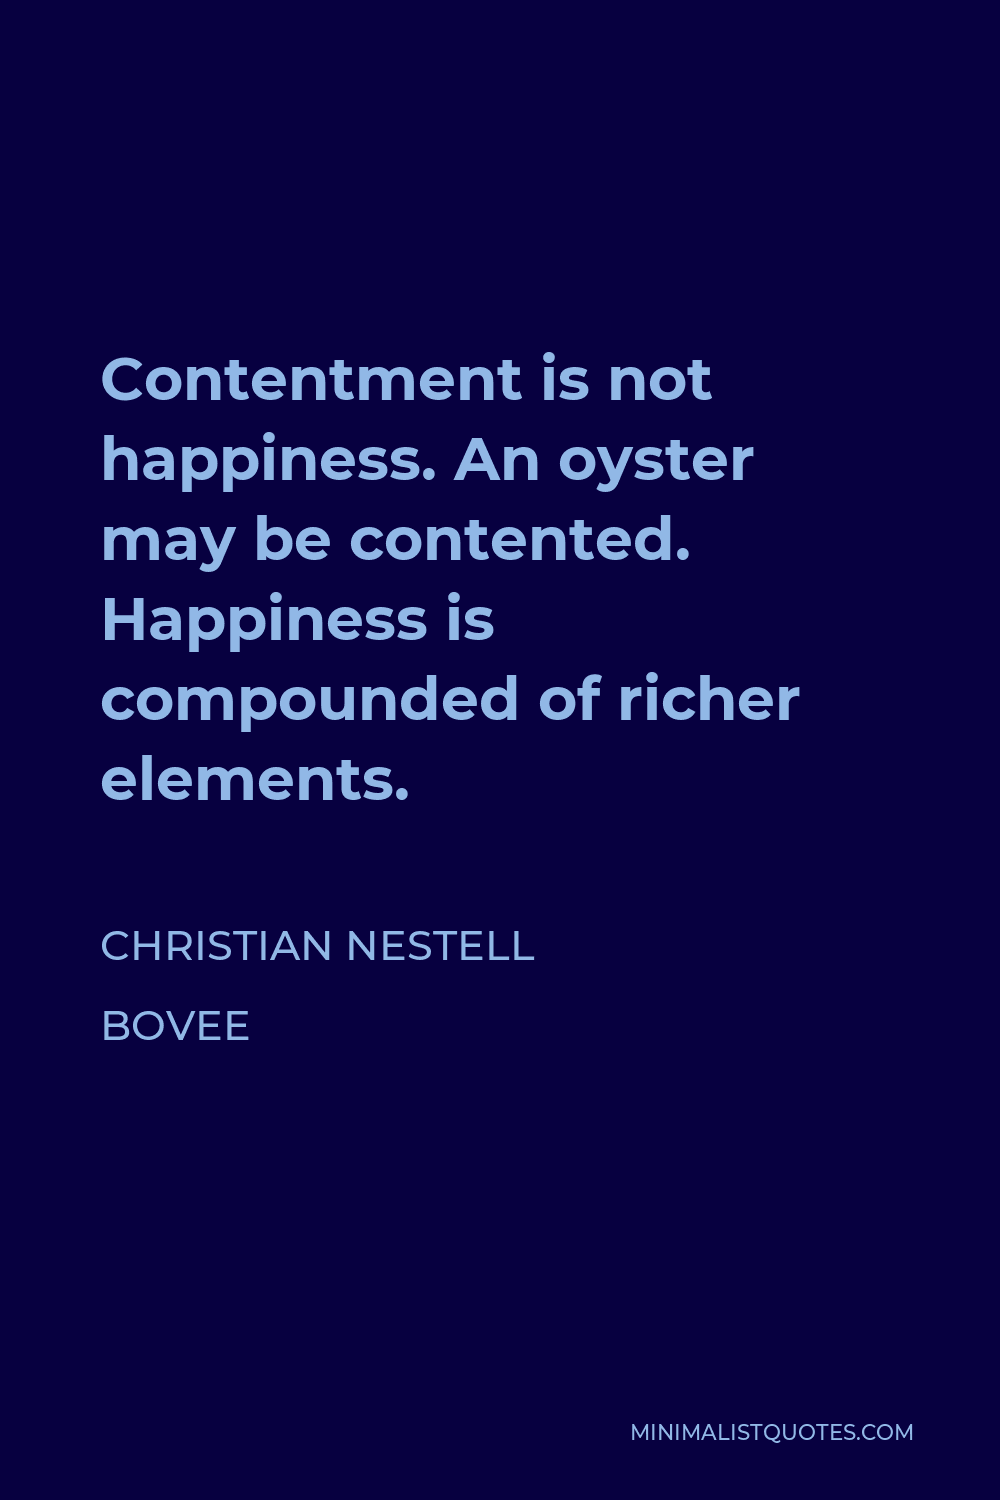 Christian Nestell Bovee Quote - Contentment is not happiness. An oyster may be contented. Happiness is compounded of richer elements.